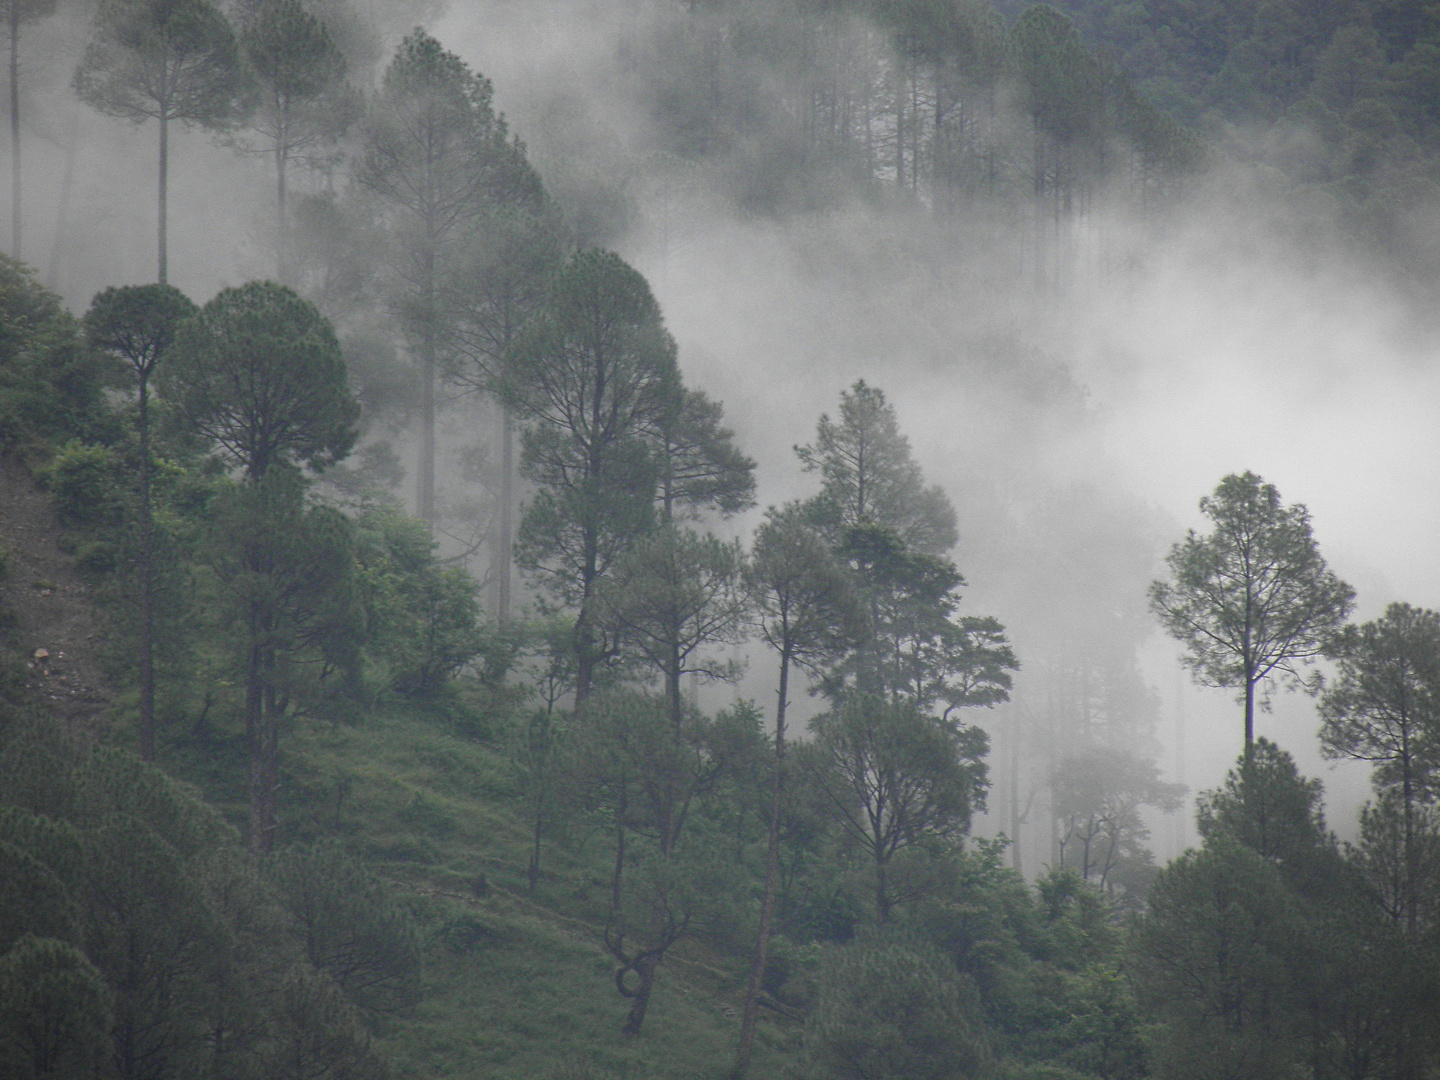 PINE FORSET COVERED IN CLOUDS IN DHARASU, HIMALAYAS